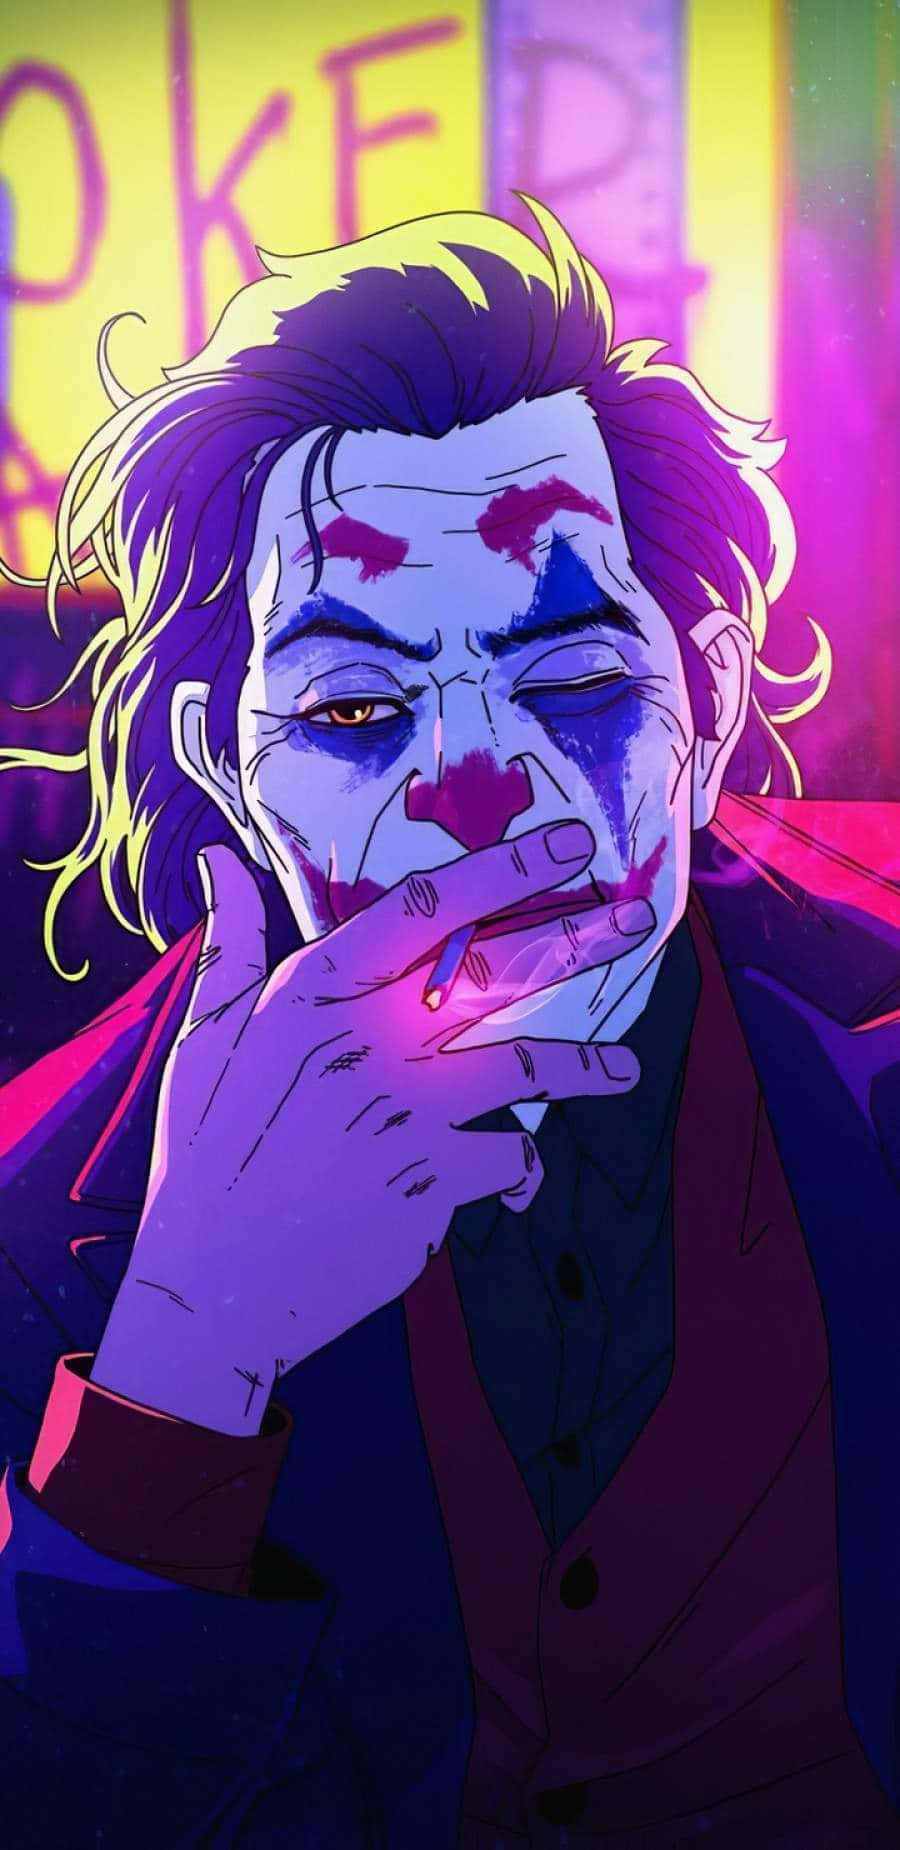 Get into the mind of the Joker Wallpaper